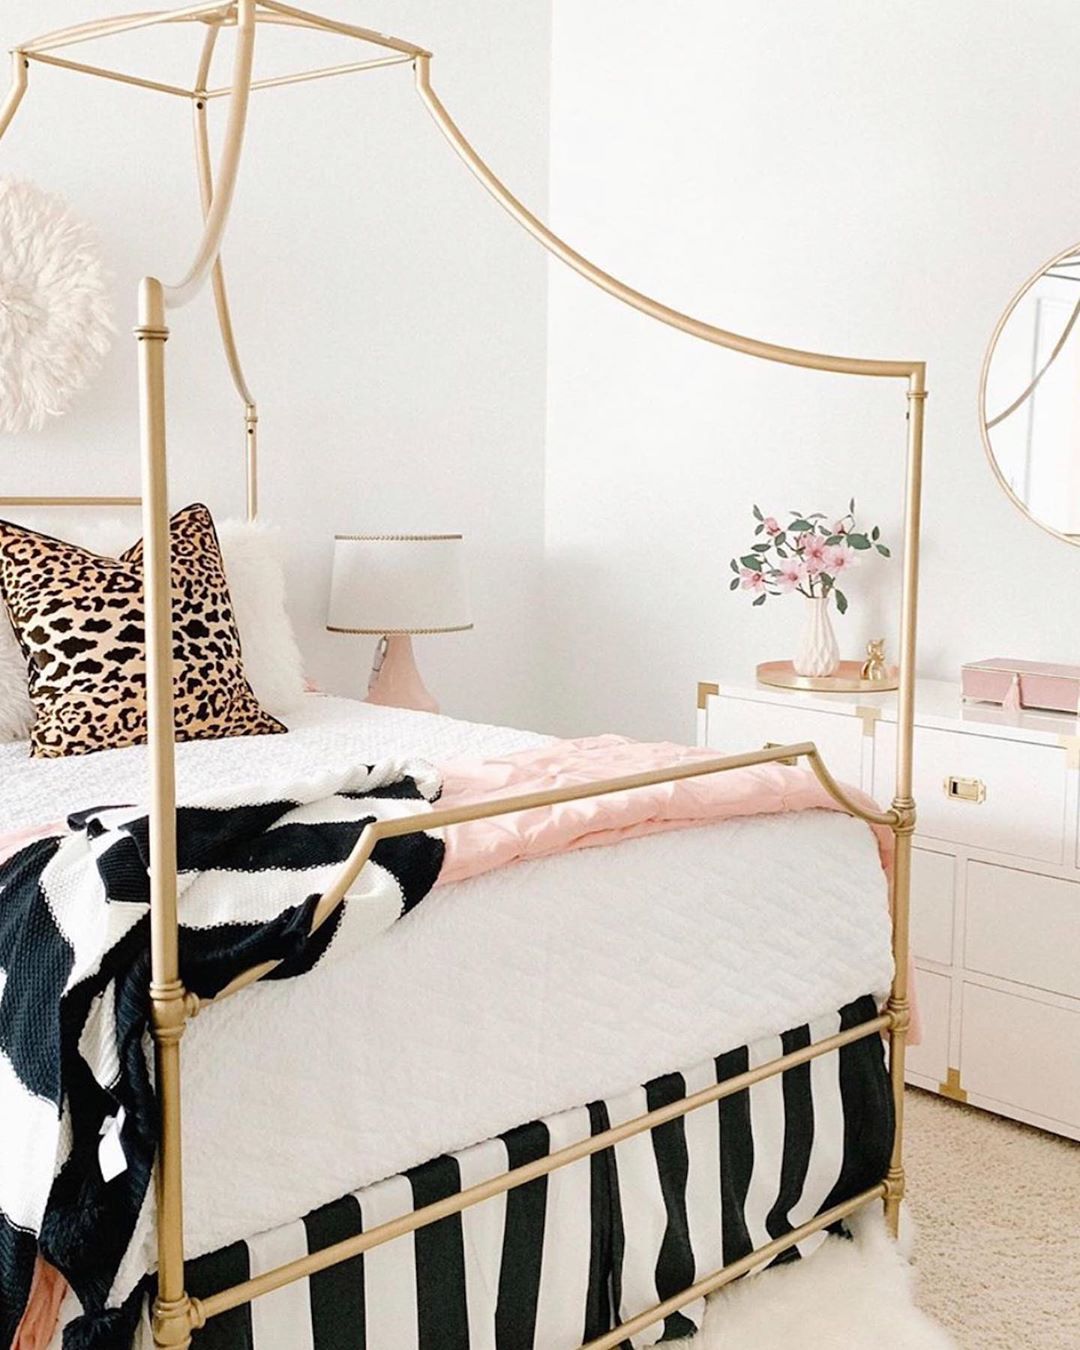 Glam Bedroom for Girls with Gold Canopy Bed via @shannongolddesign